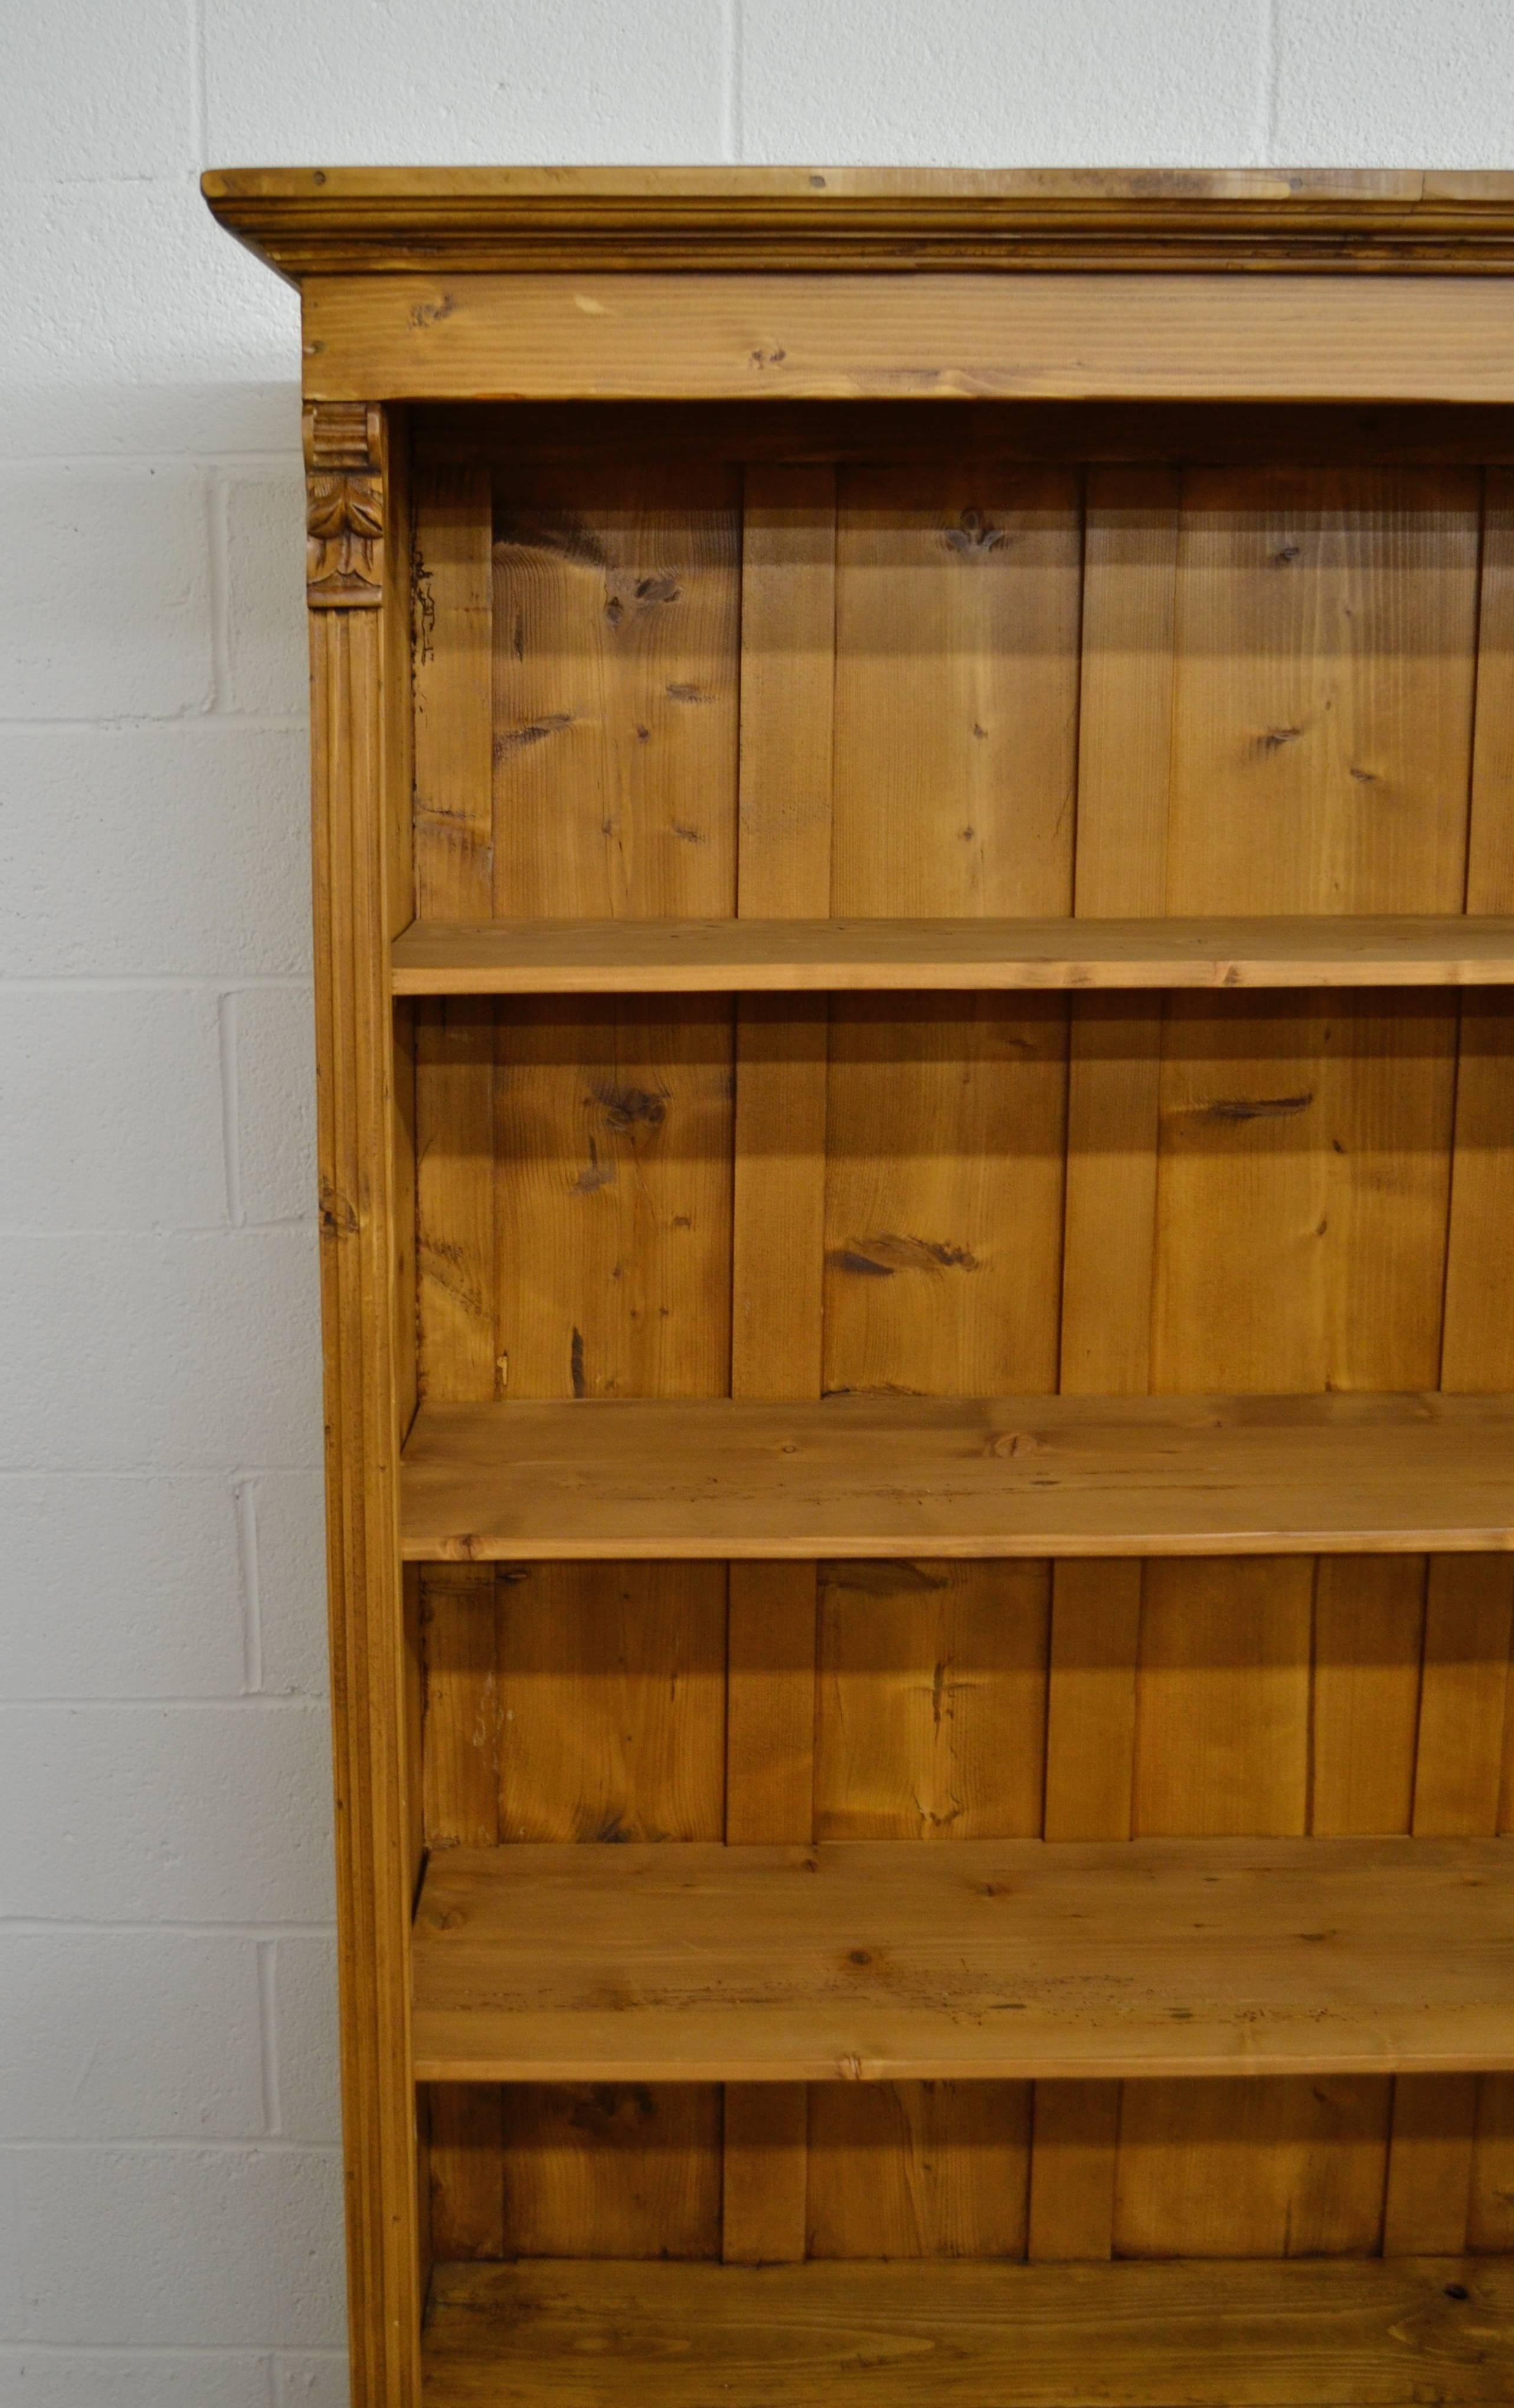 A vintage armoire that lost its doors provided the shell of this bookcase, with one side board removed to reduce the depth and the original drawer cut down to fit. Three strong shelves from reclaimed pine provide four big spaces for storing books or